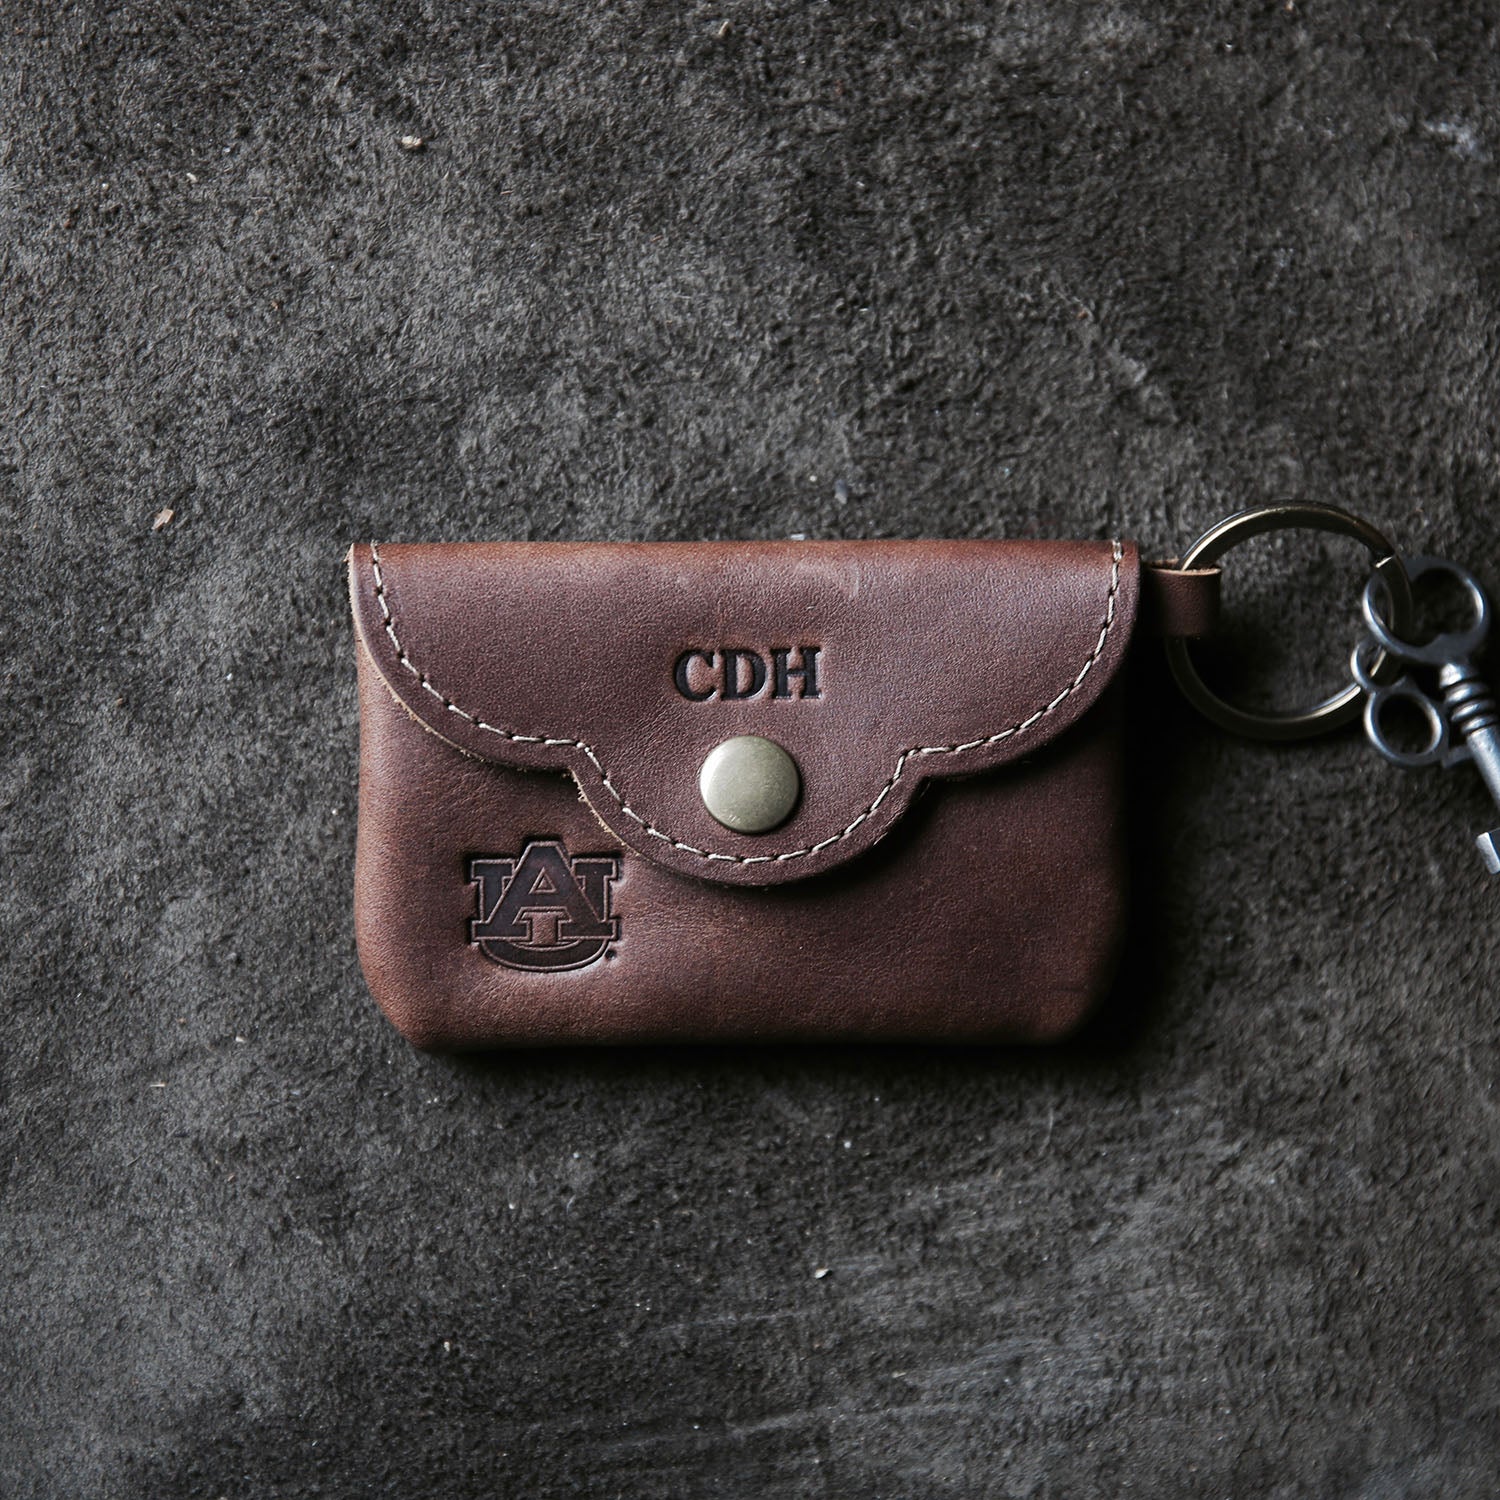 Fine leather scallop keychain wallet with personalized initials and Auburn logo